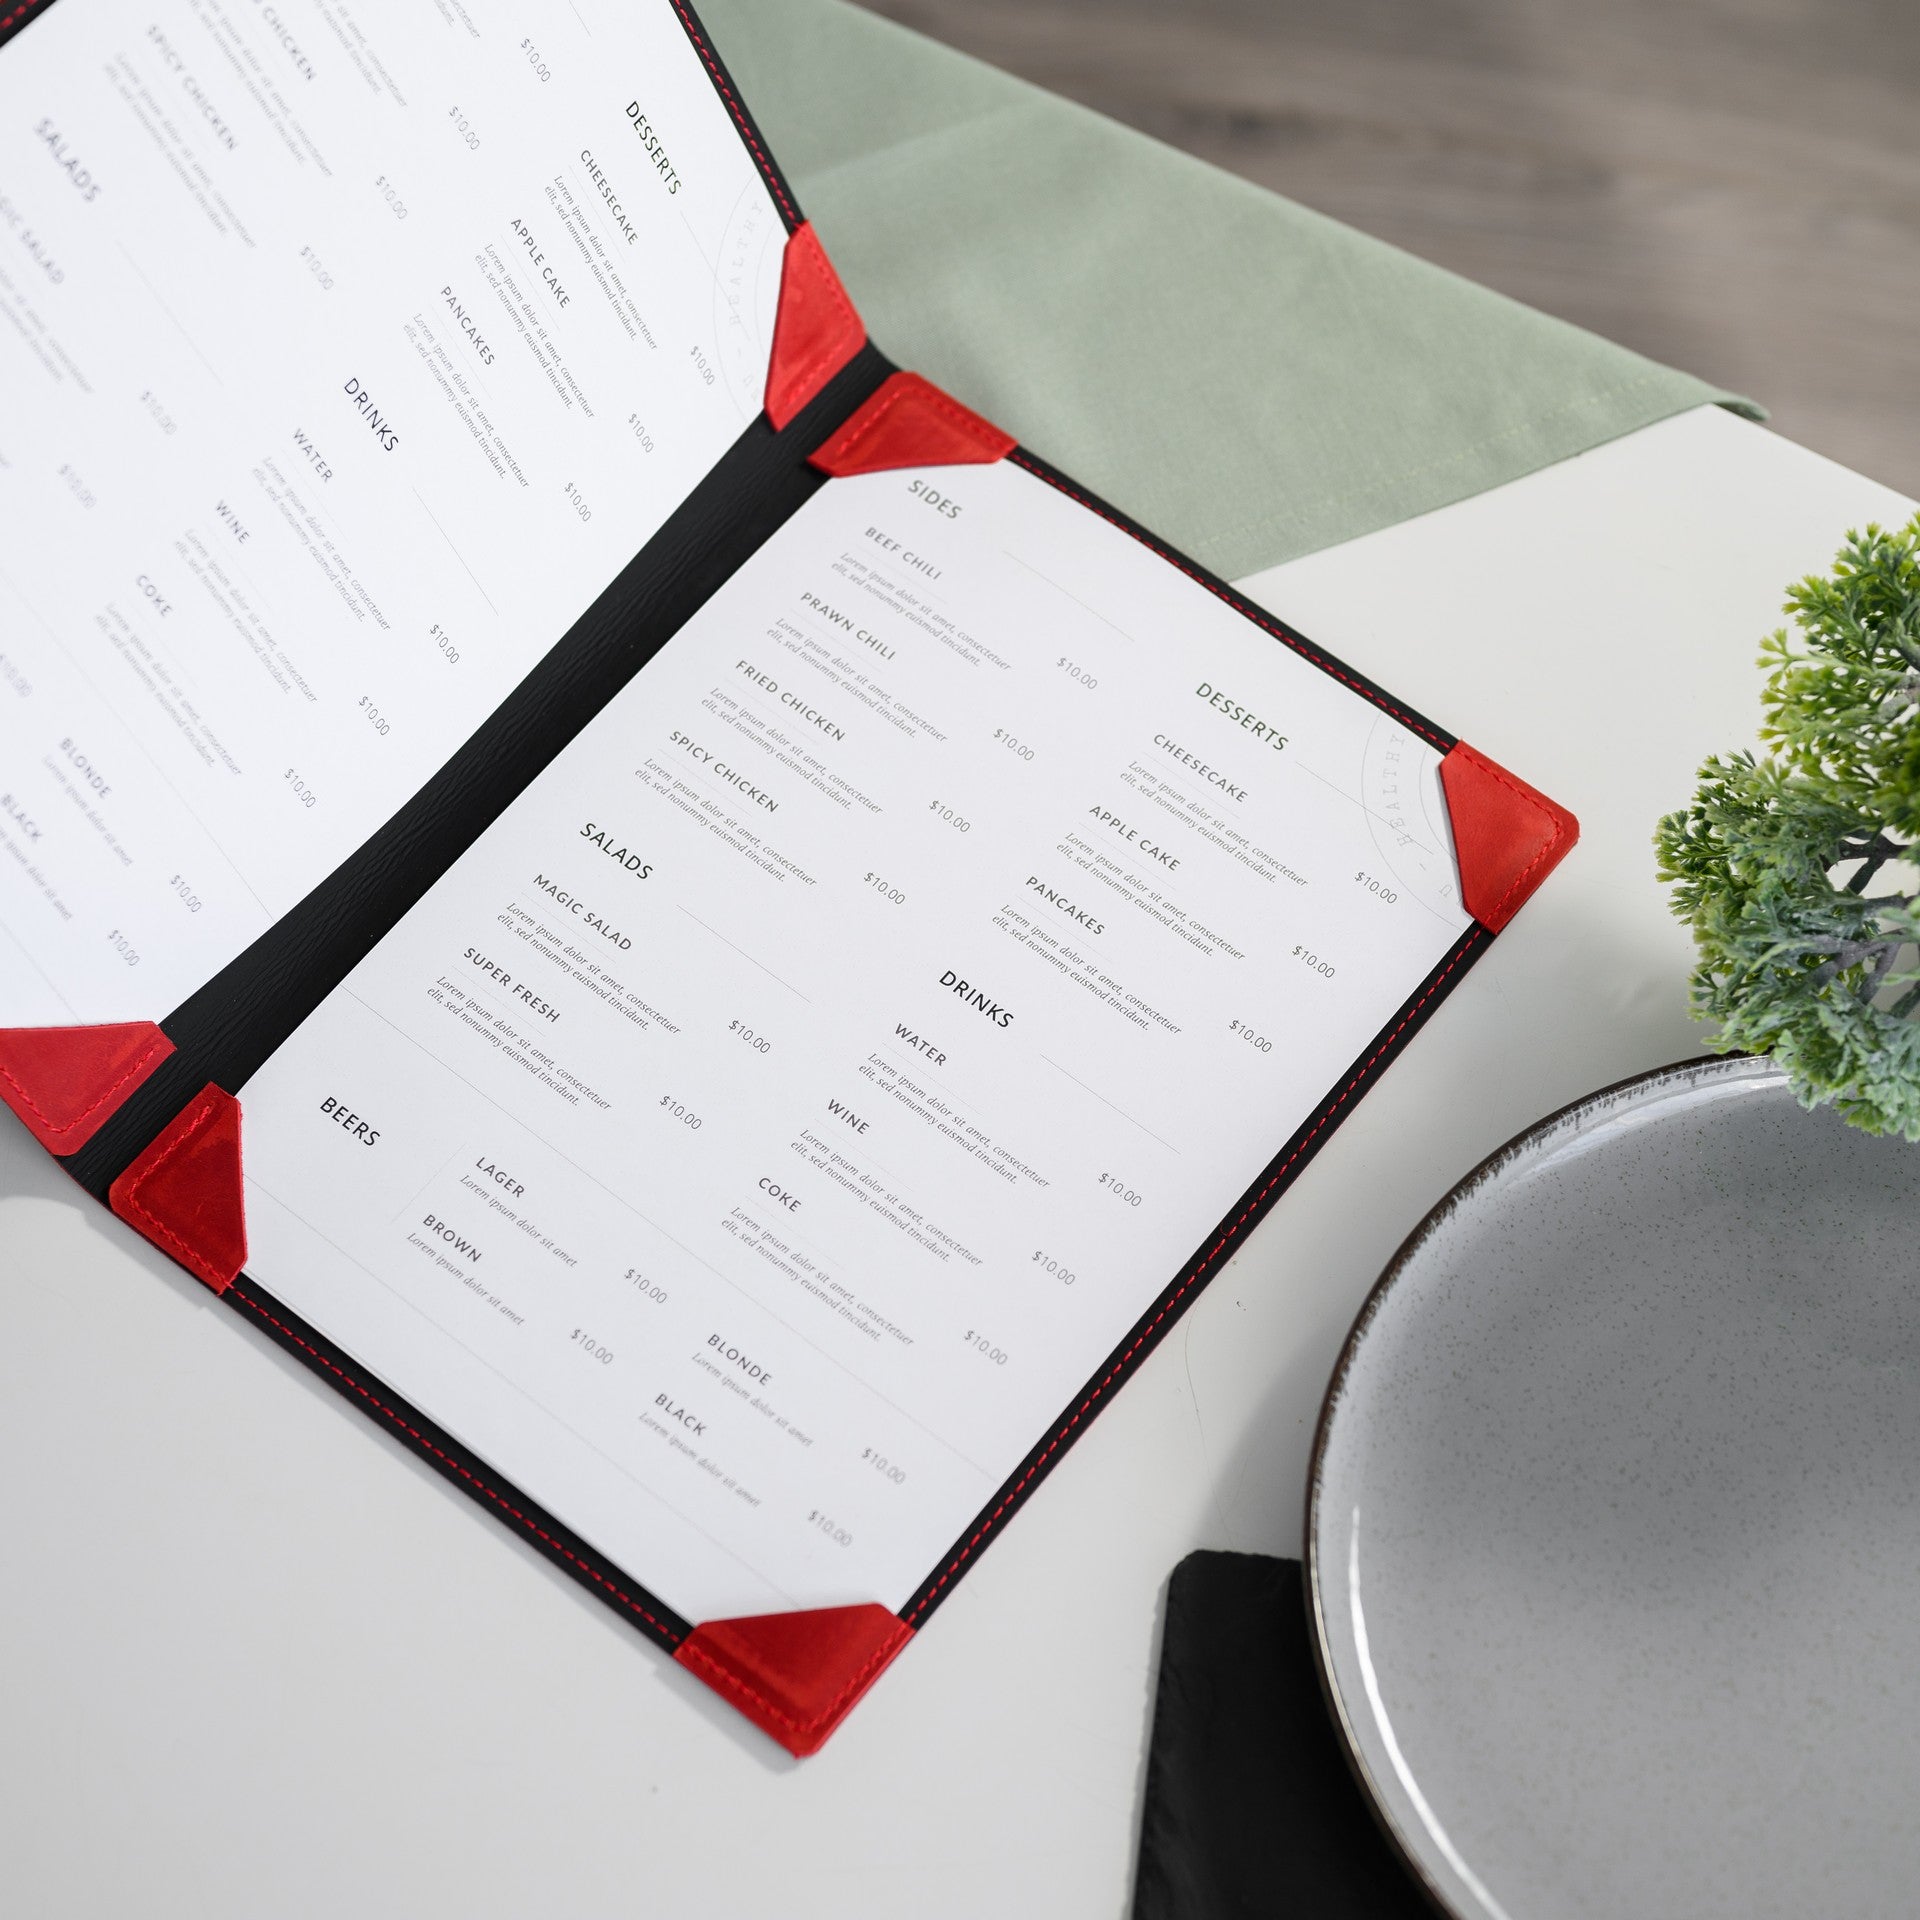 Classic Leather Menu Clipboard, offering a stylish and professional presentation for your menu items, enhancing the dining experience with its timeless appeal and quality craftsmanship.